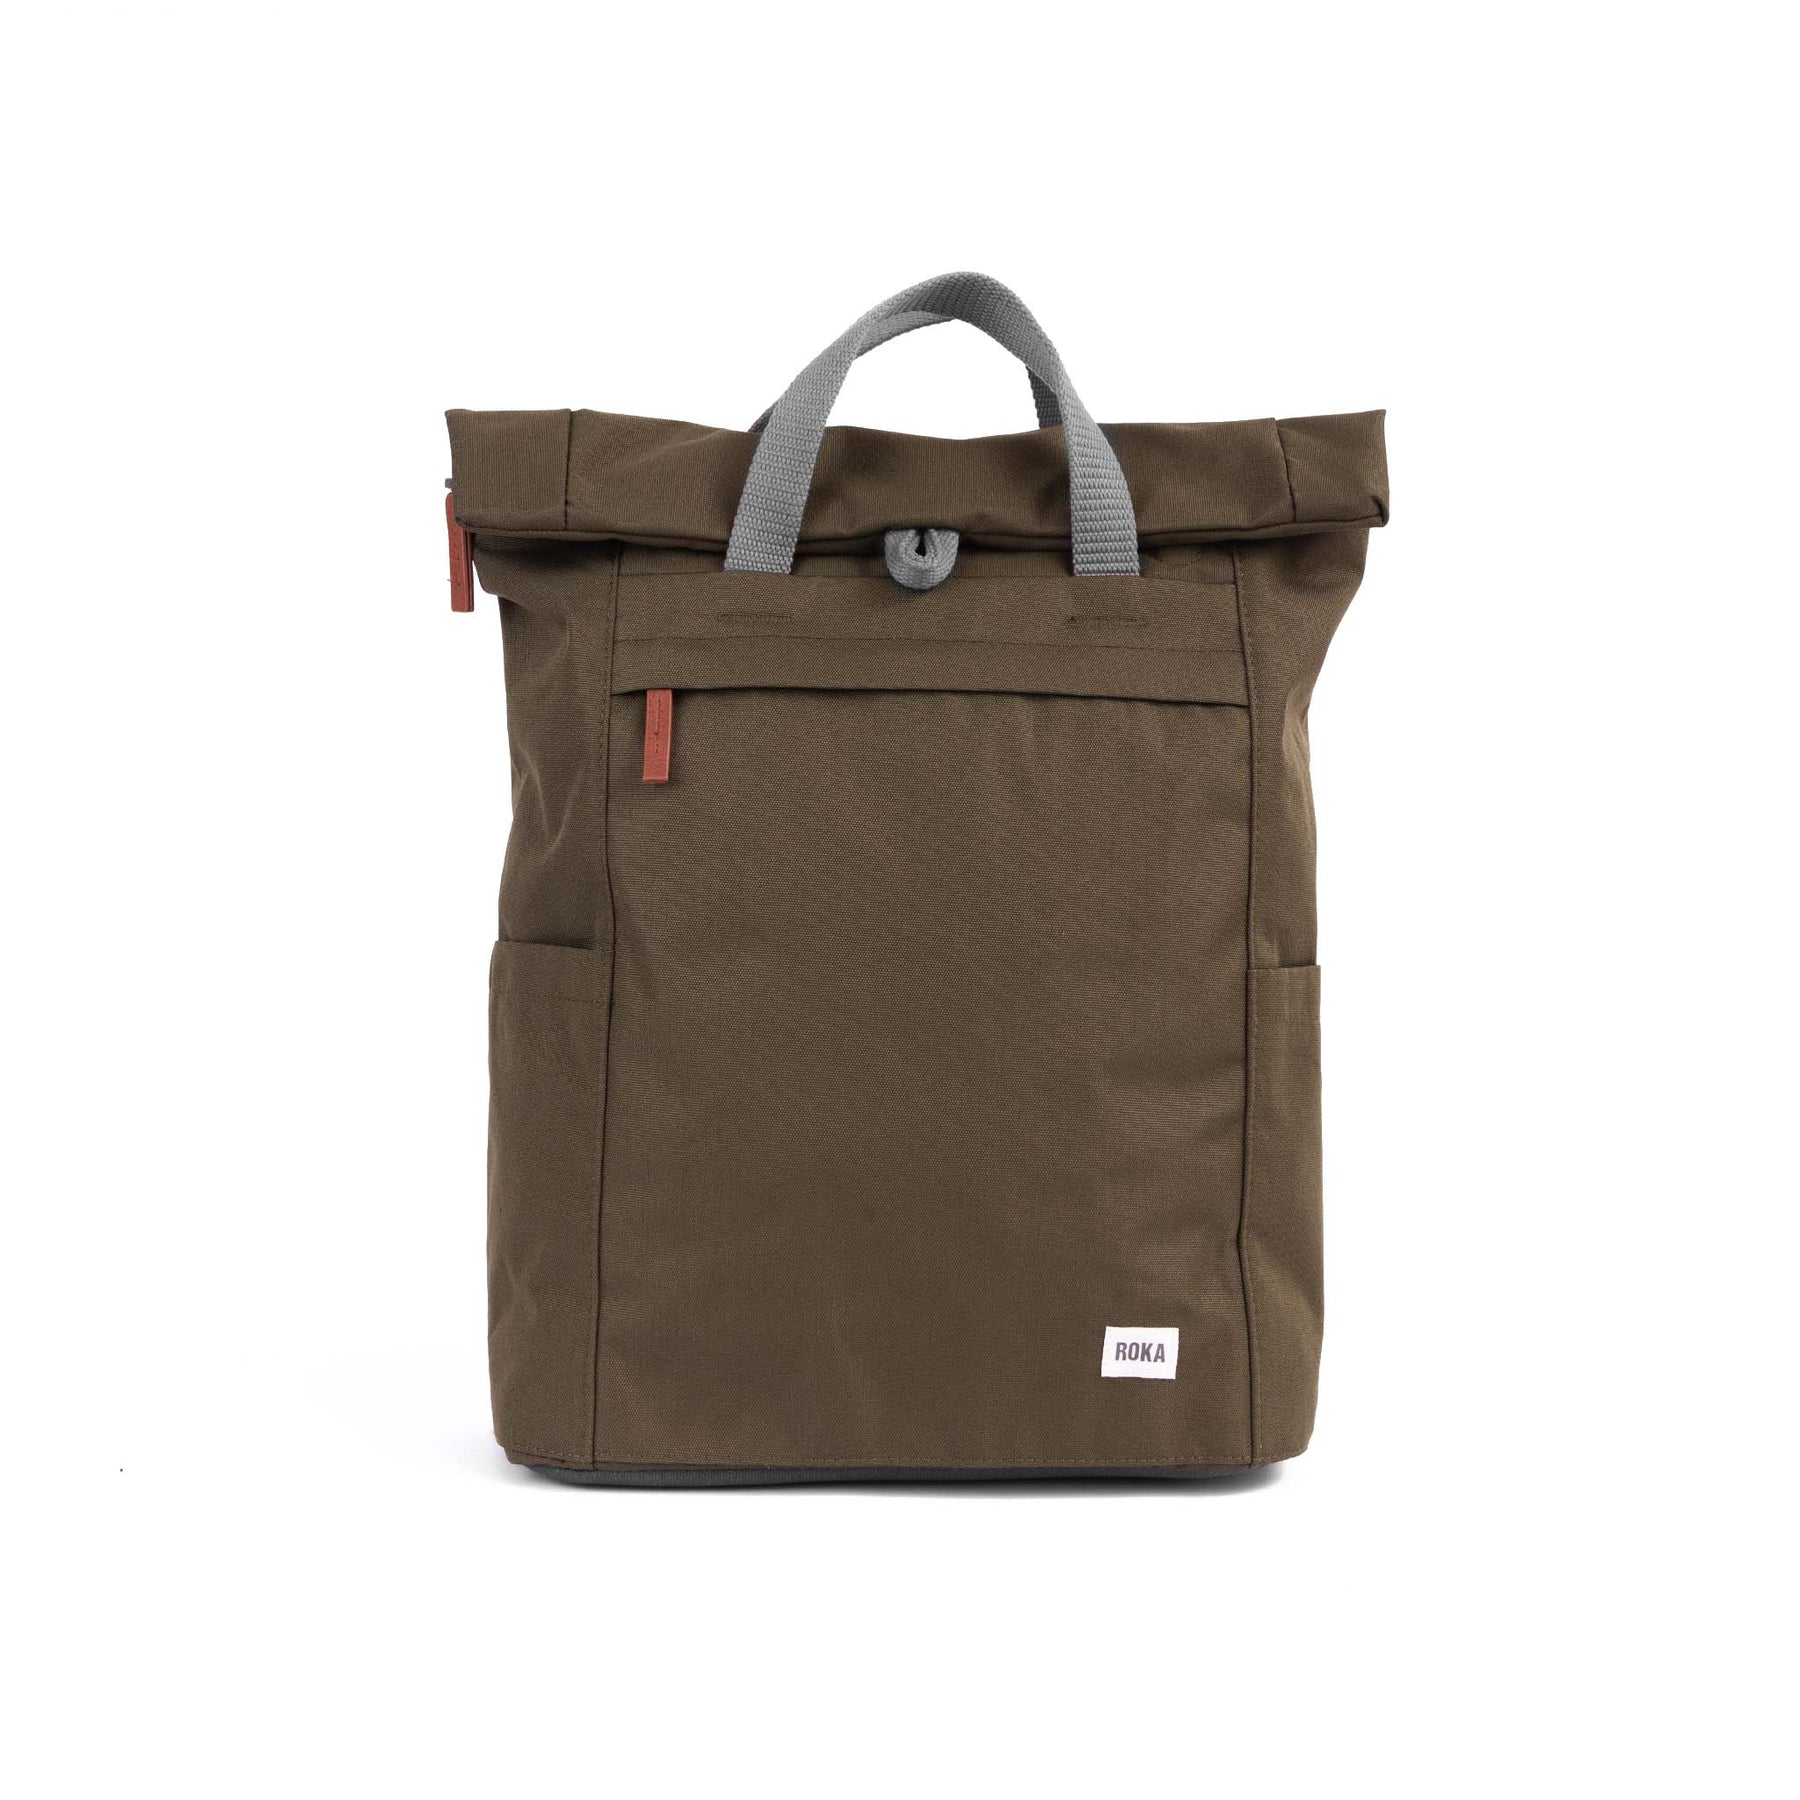 ROKA Finchley A Moss Large Recycled Canvas Bag - OS